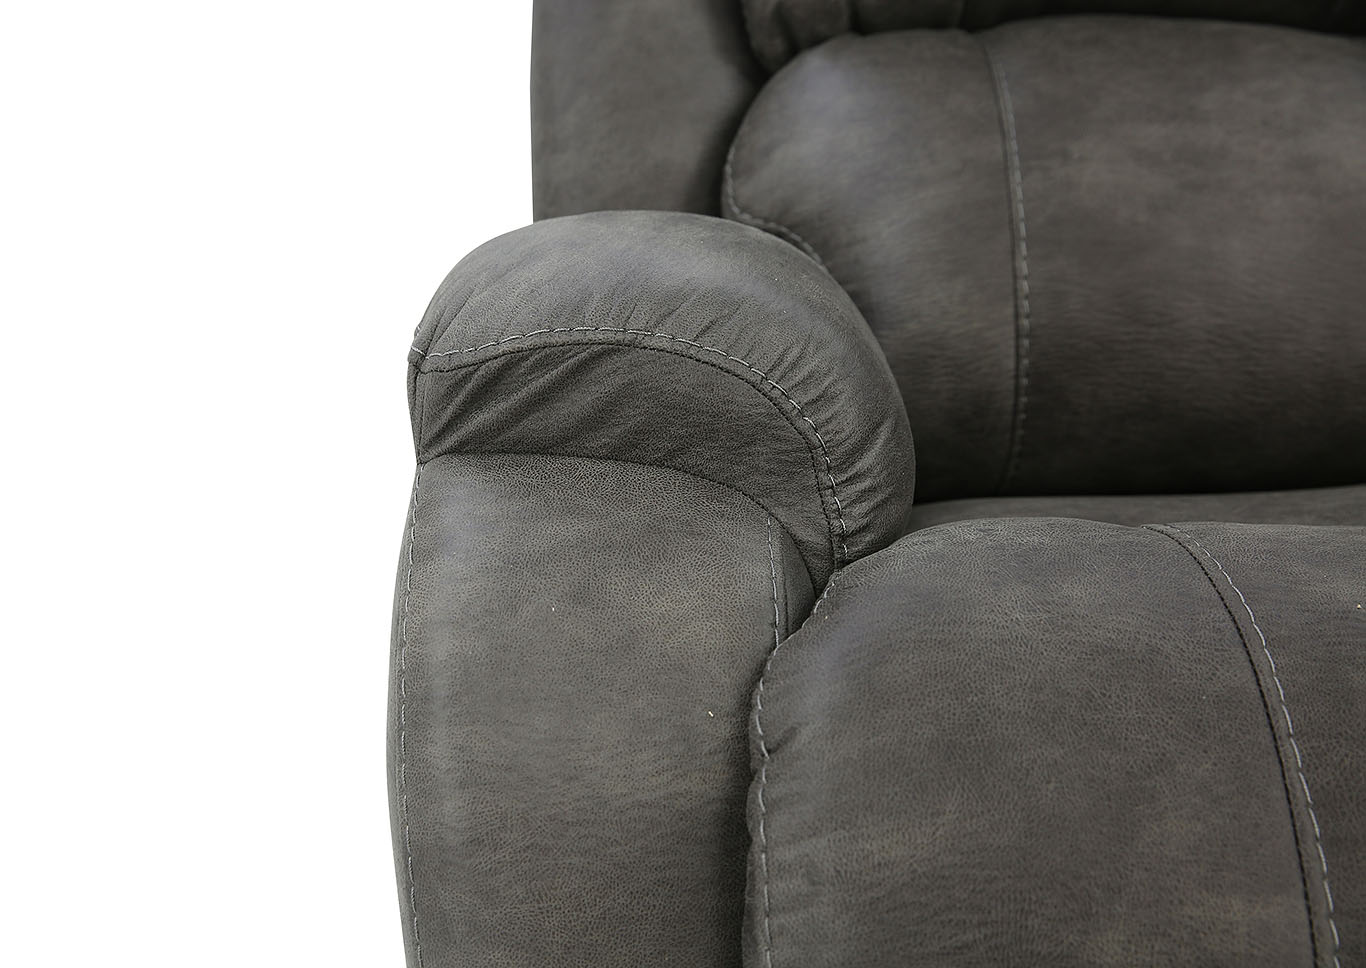 MAXWELL GREY RECLINING LOVESEAT WITH CONSOLE,HOMESTRETCH